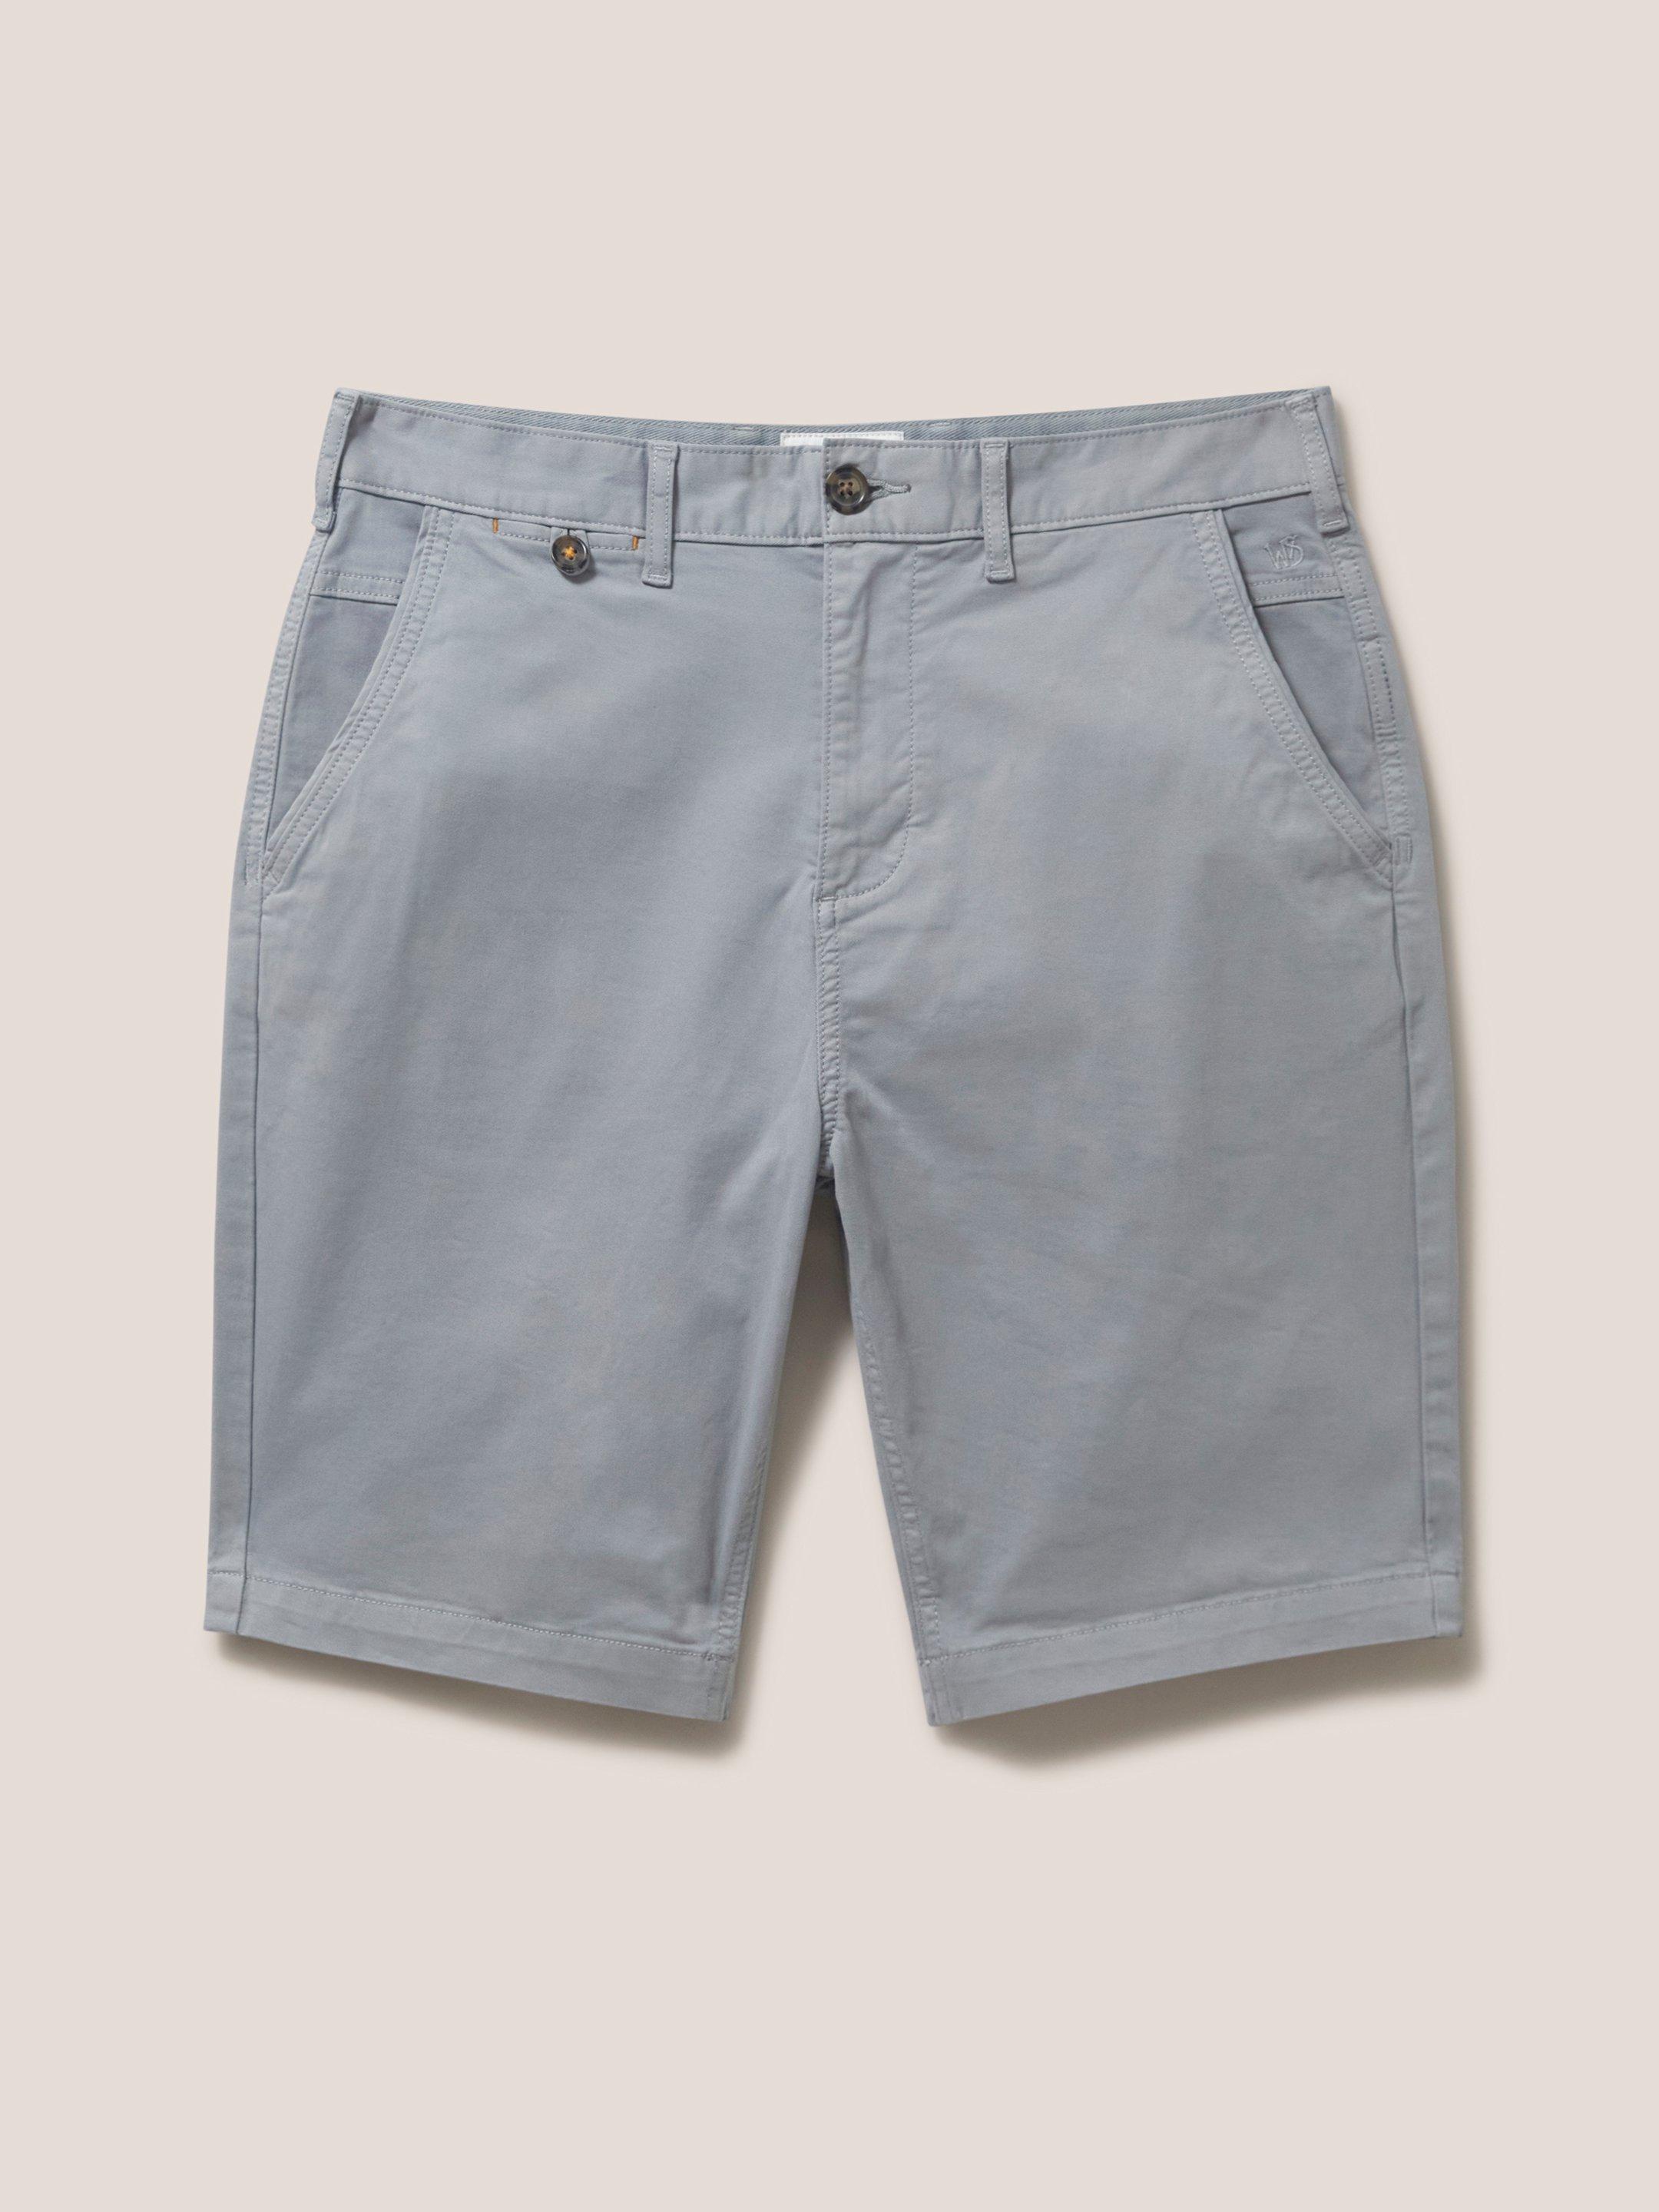 Sutton Slim Fit Chino Short in LGT GREY - FLAT FRONT